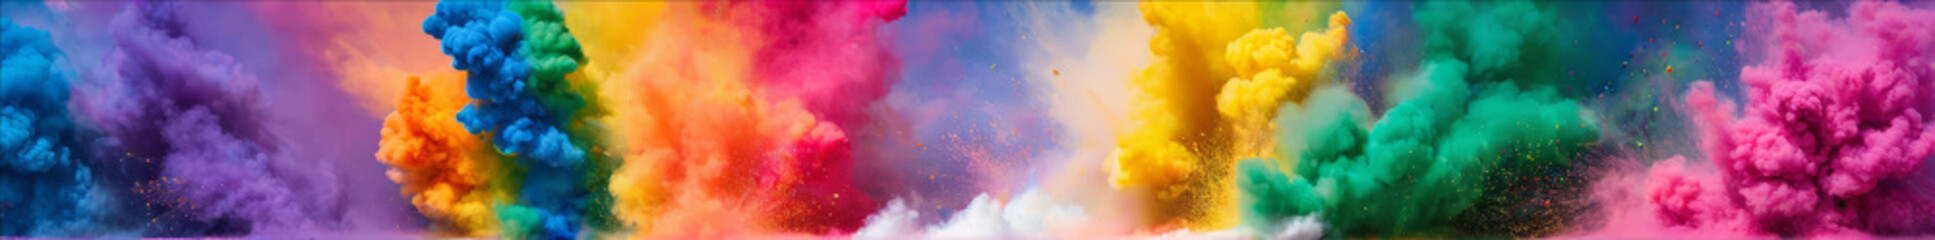 Fototapeta na wymiar LGBT+ Explosion: Abstract Pride-Colored Powder Burst with Isolated Splatter - Rainbow Smoke Particles and Explosive Vibrancy for Inclusive Designs, Celebrations, and Colorful Backgrounds